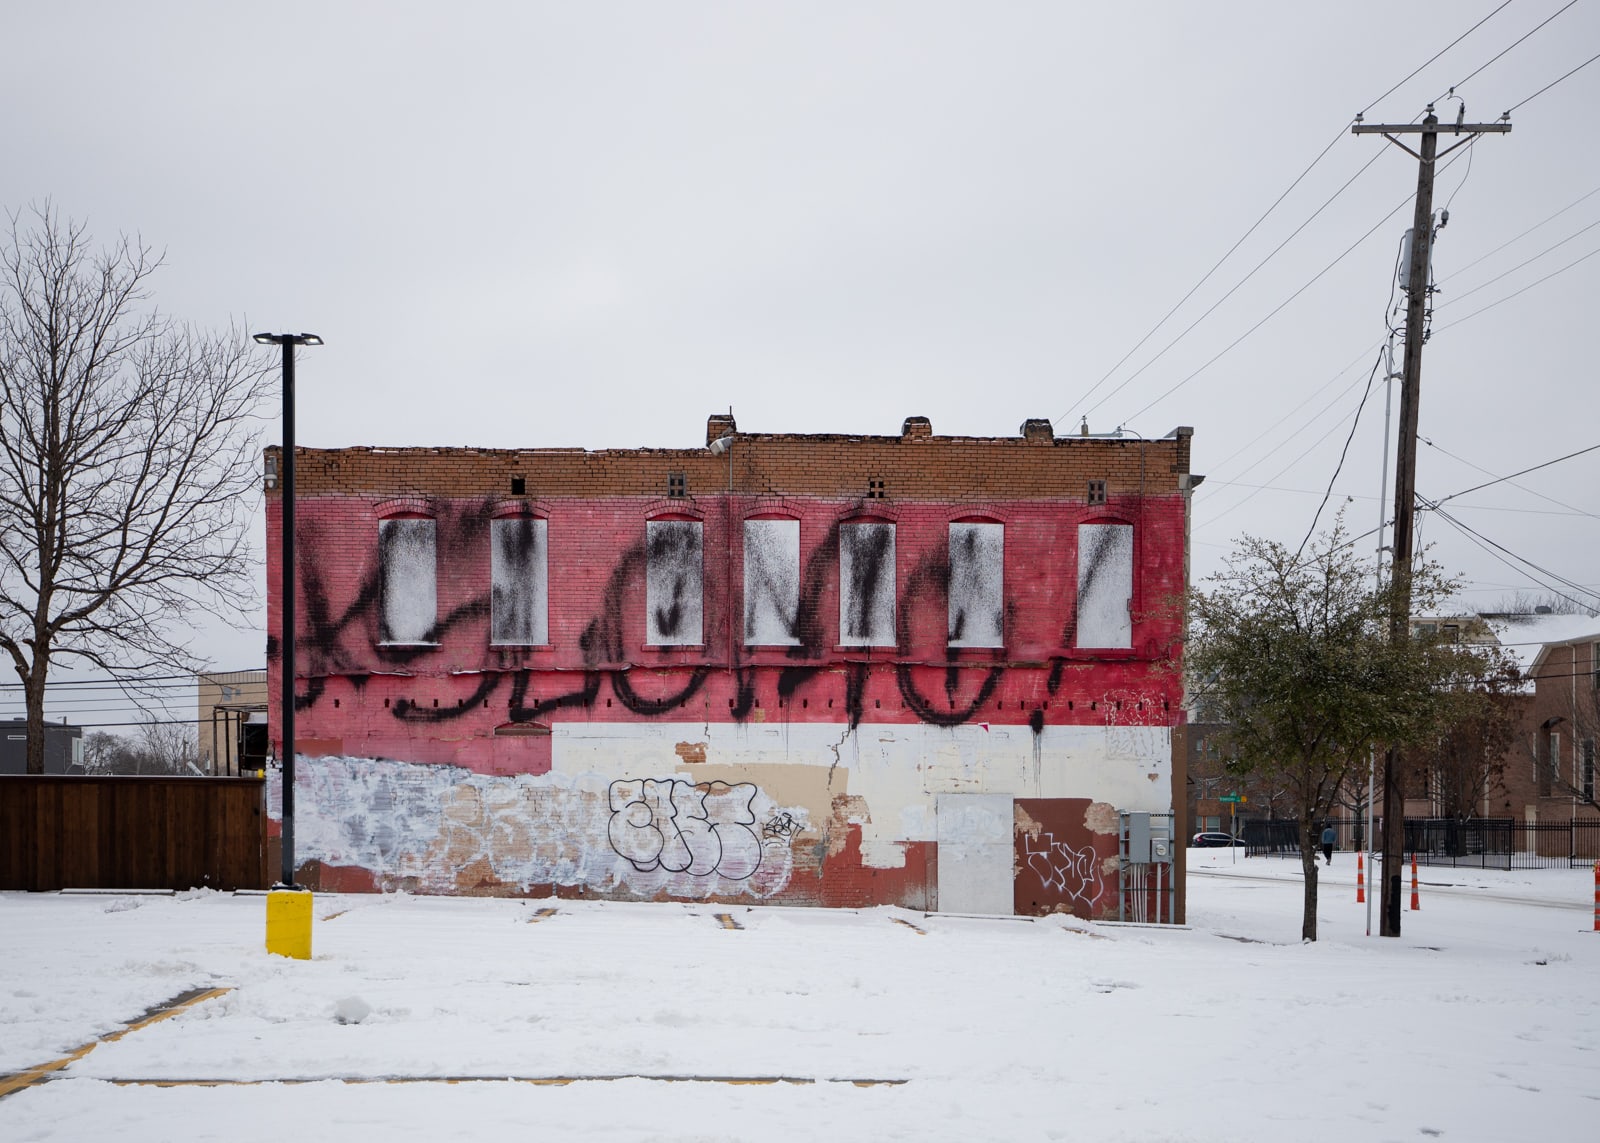 An old building with graffiti on it after the winter storm